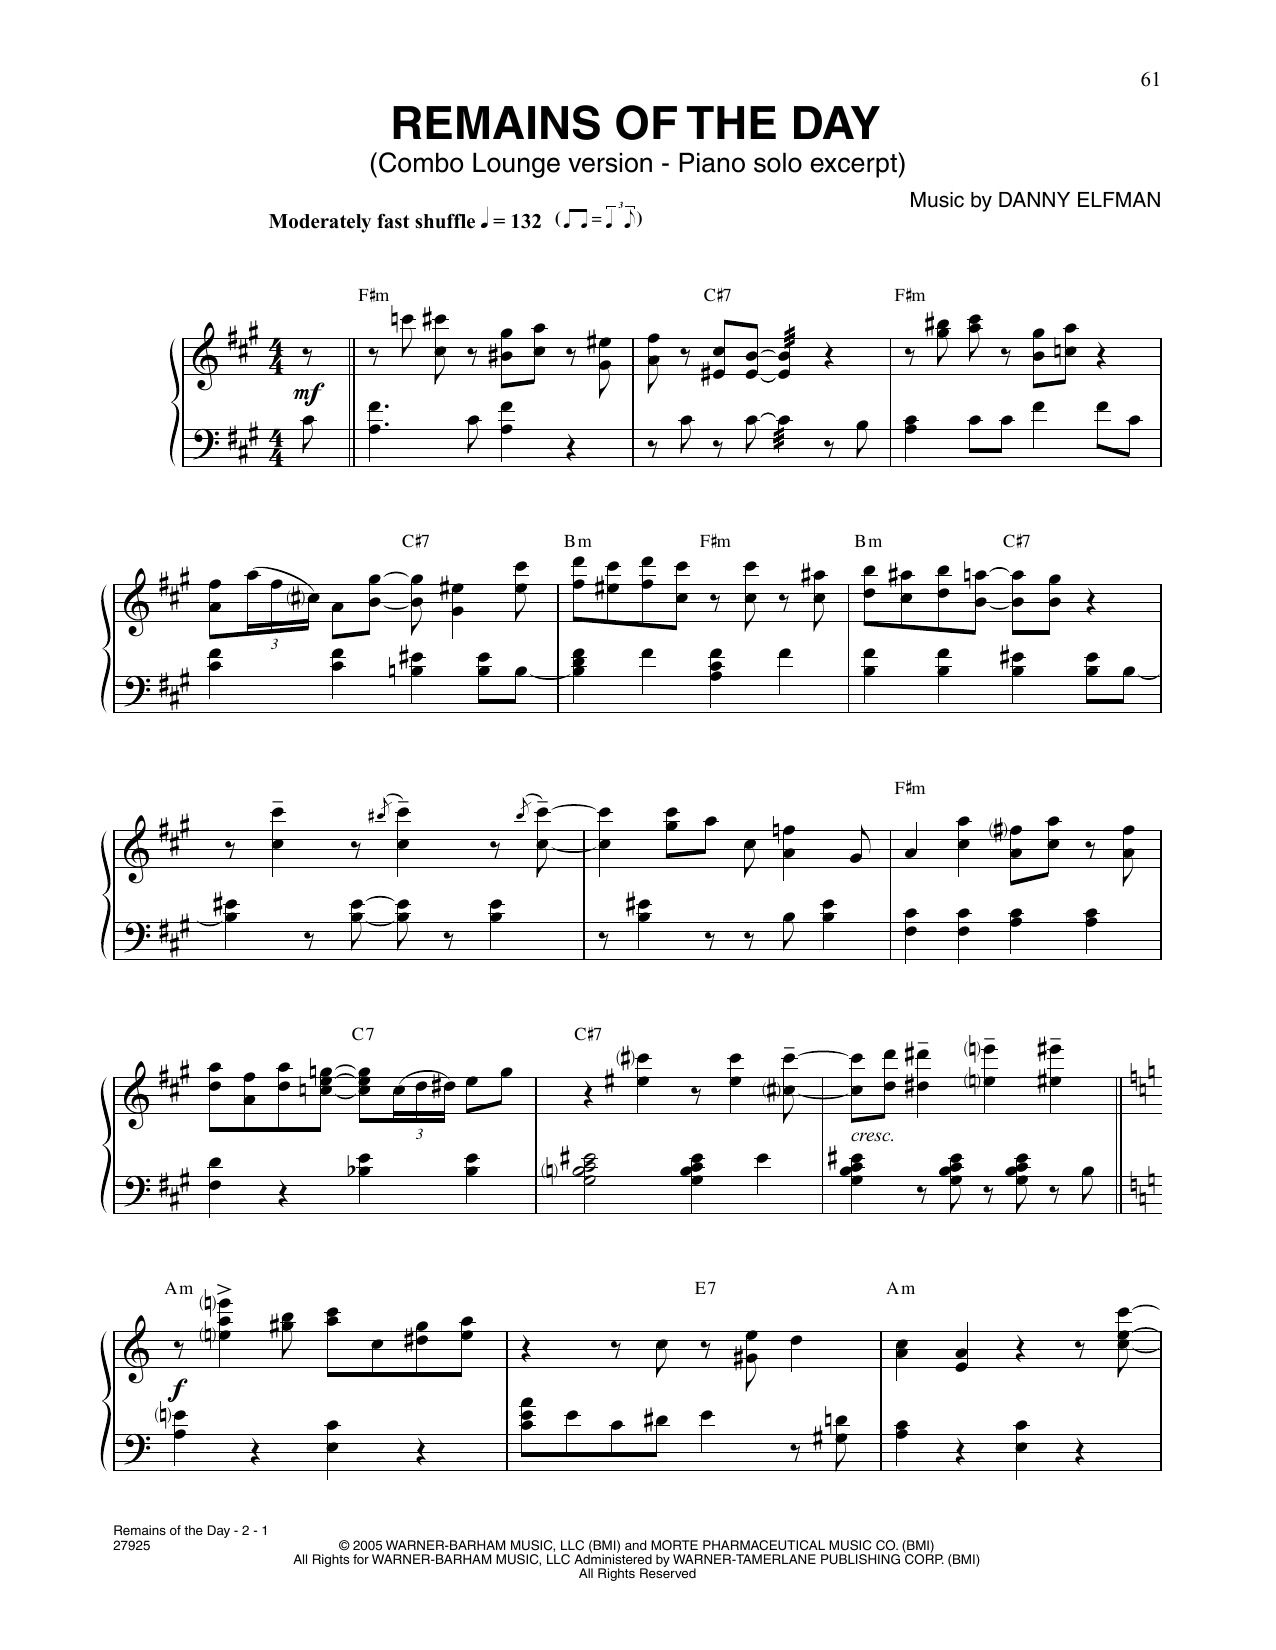 Download Danny Elfman Remains Of The Day (from Corpse Bride) Sheet Music